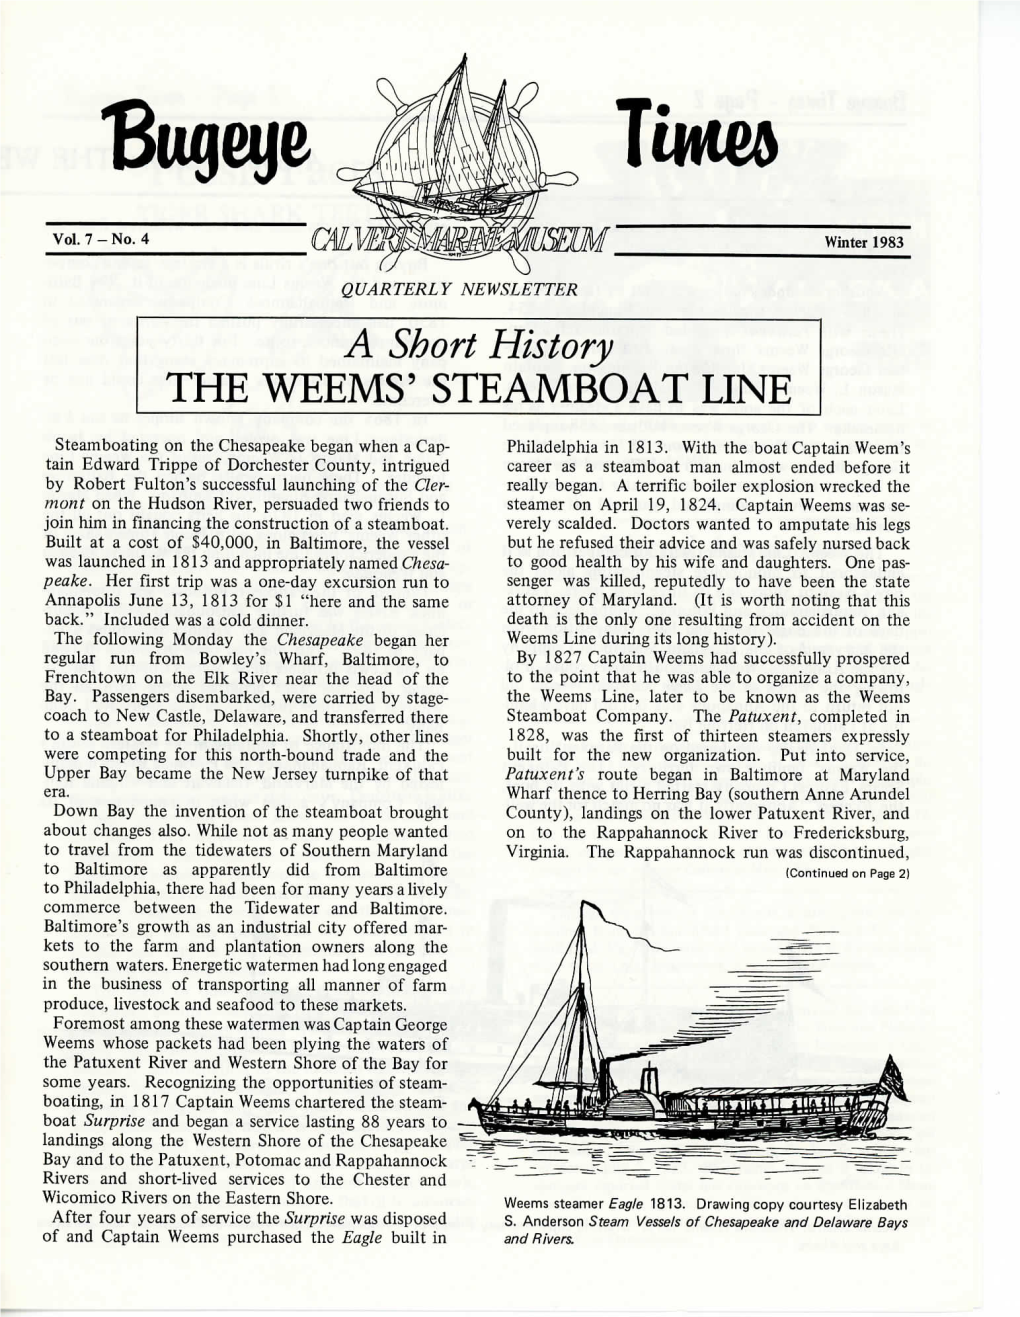 A Short History the WEEMS' STEAMBOAT LINE